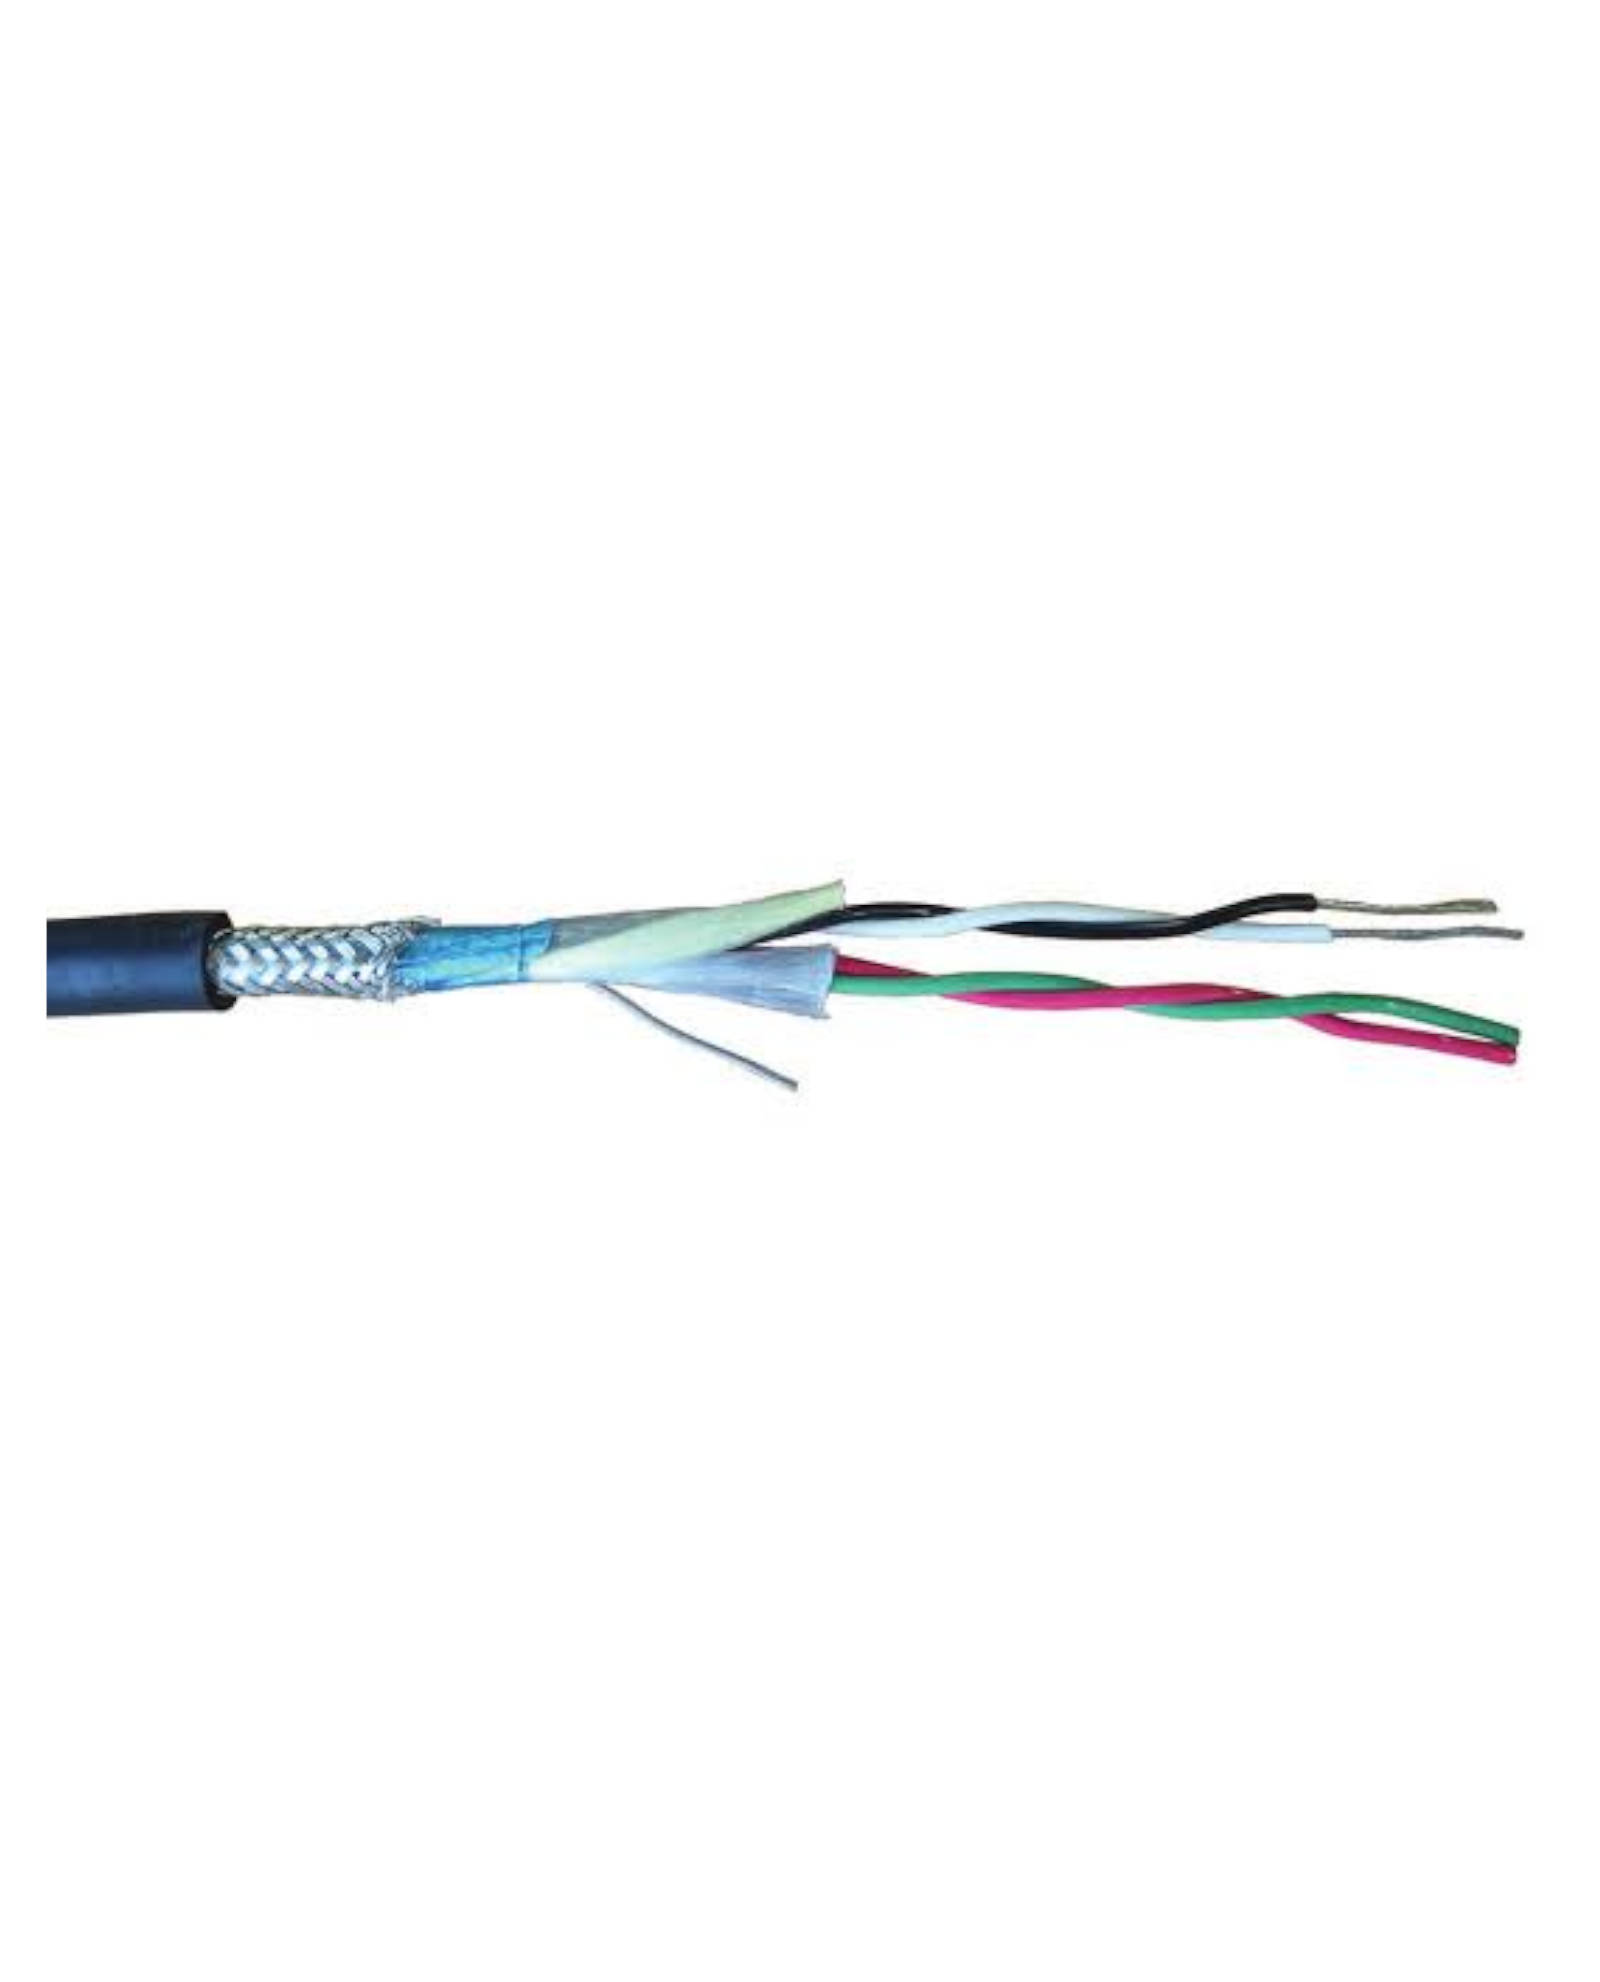 Tmb Proplex Submersible Data Cable